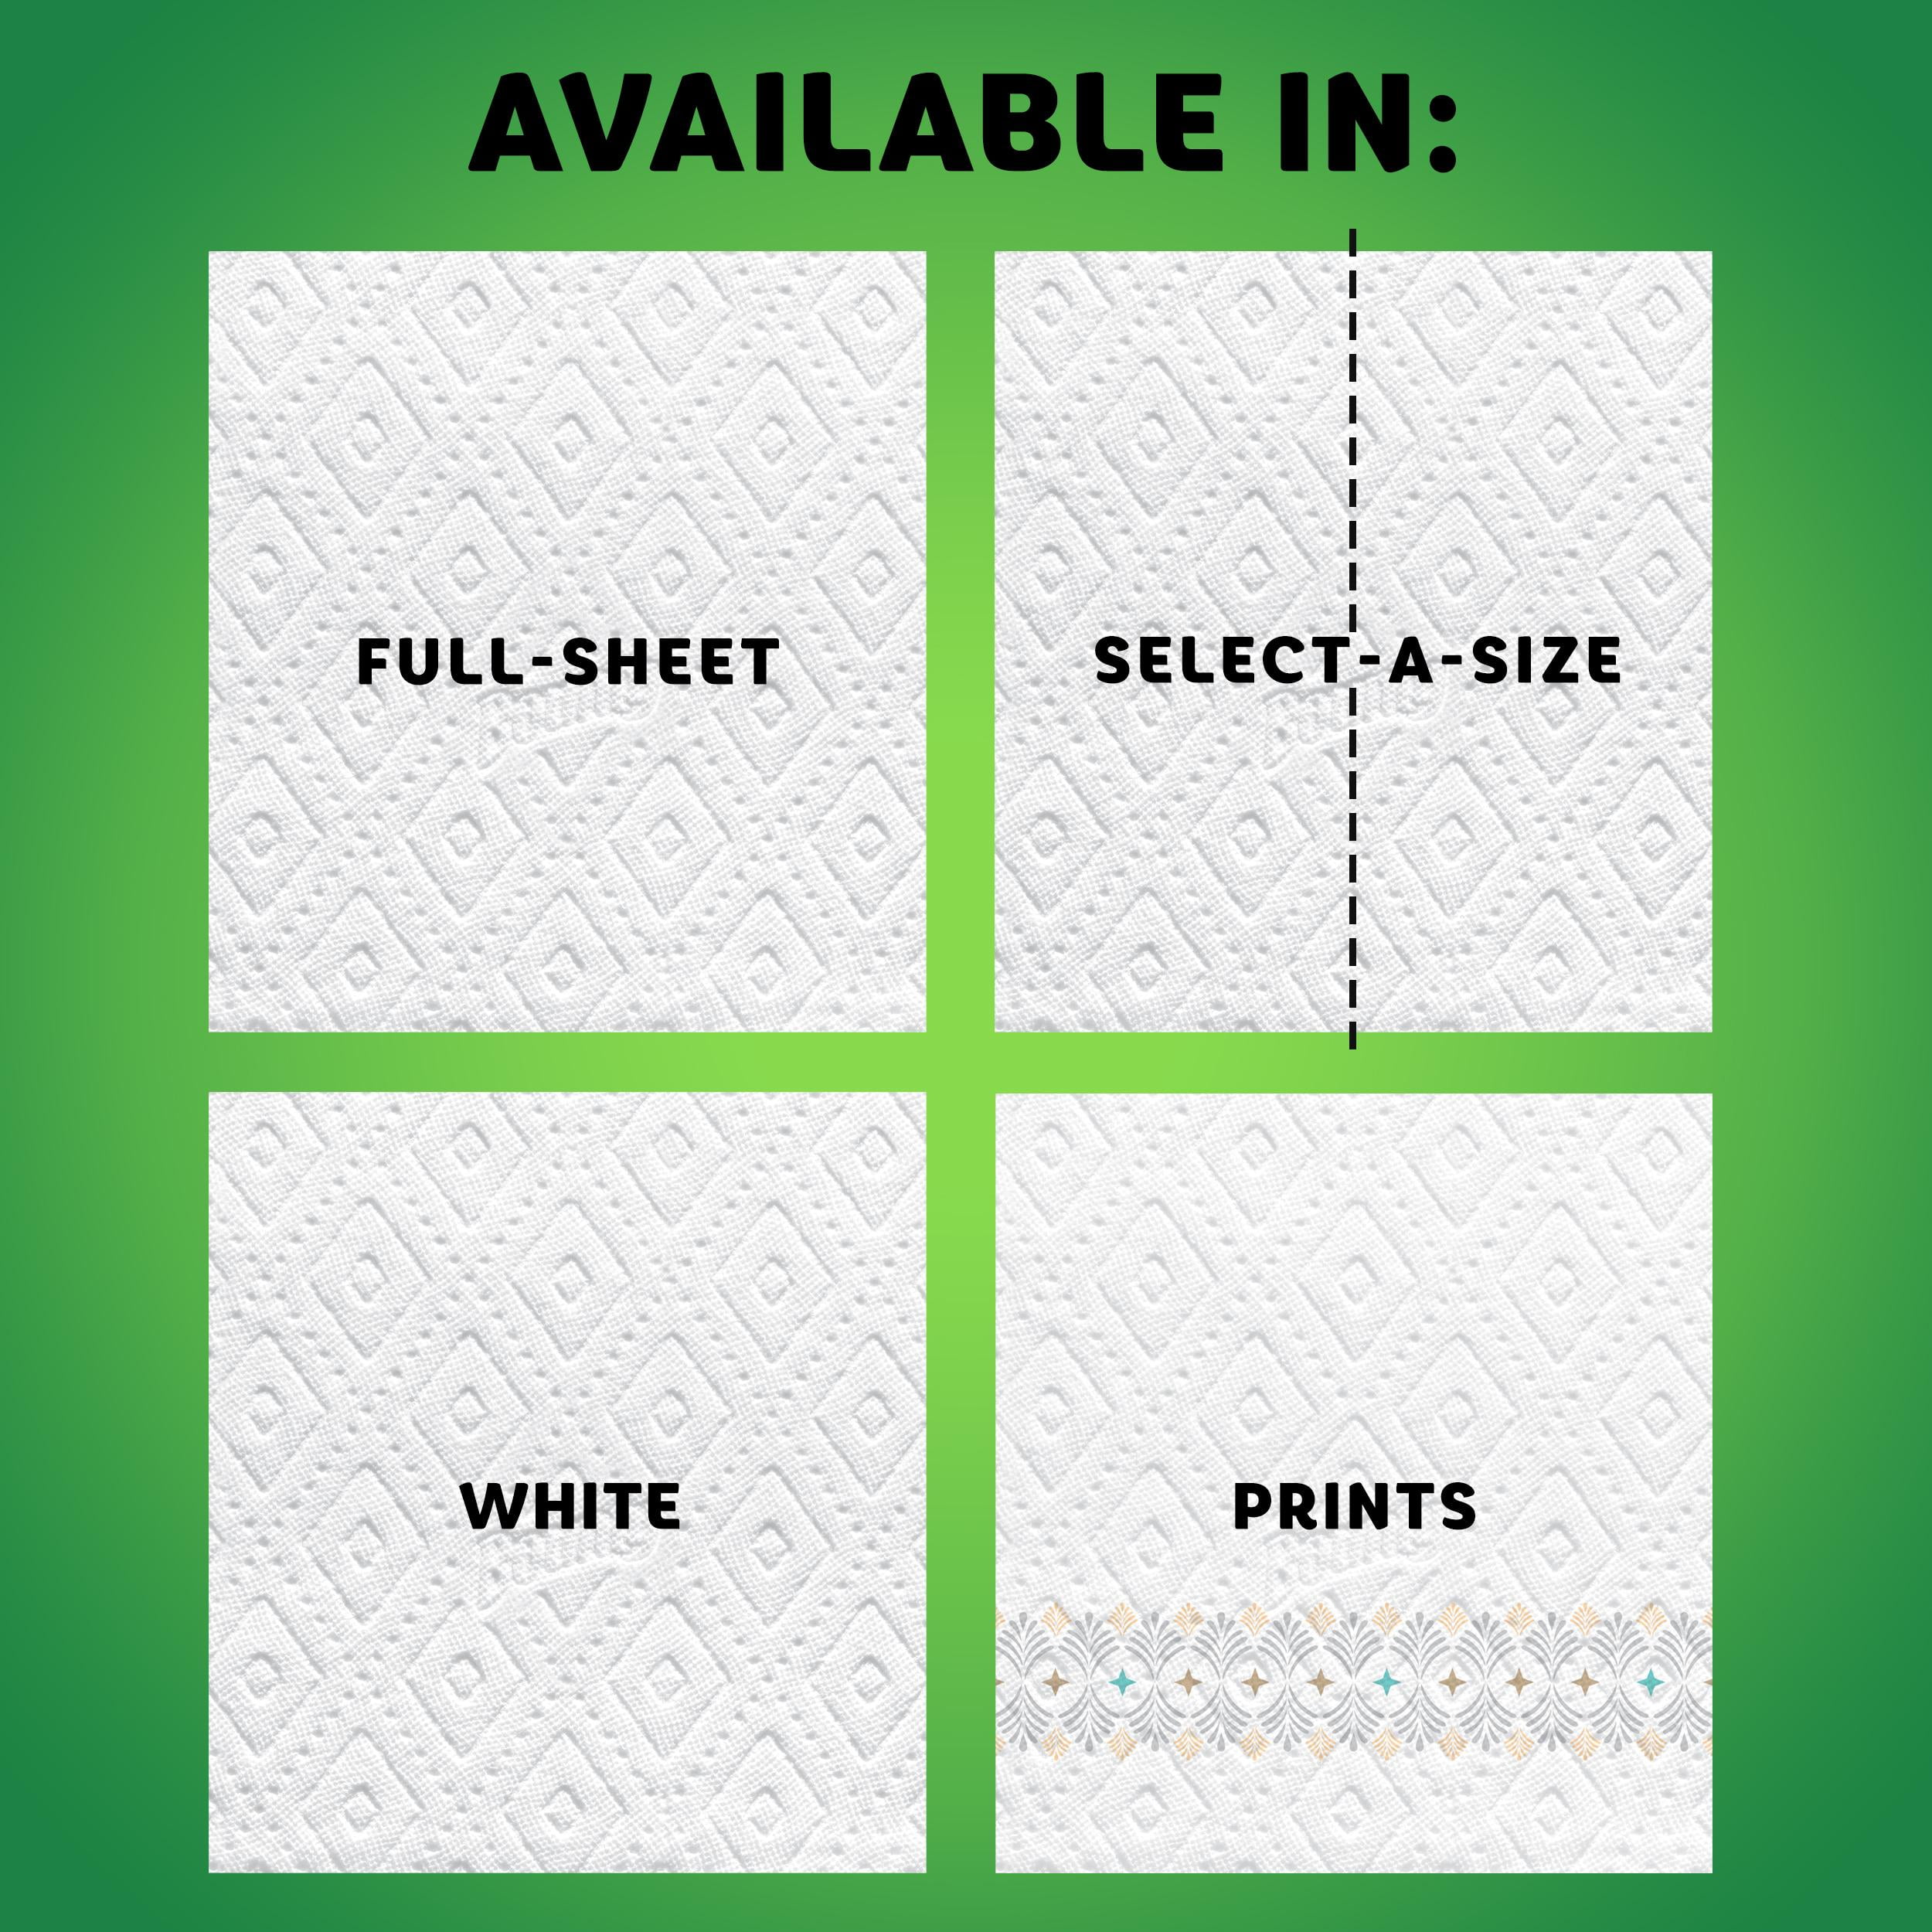 Bounty Select-A-Size Paper Towels, White, 8 Double Plus Rolls = 20